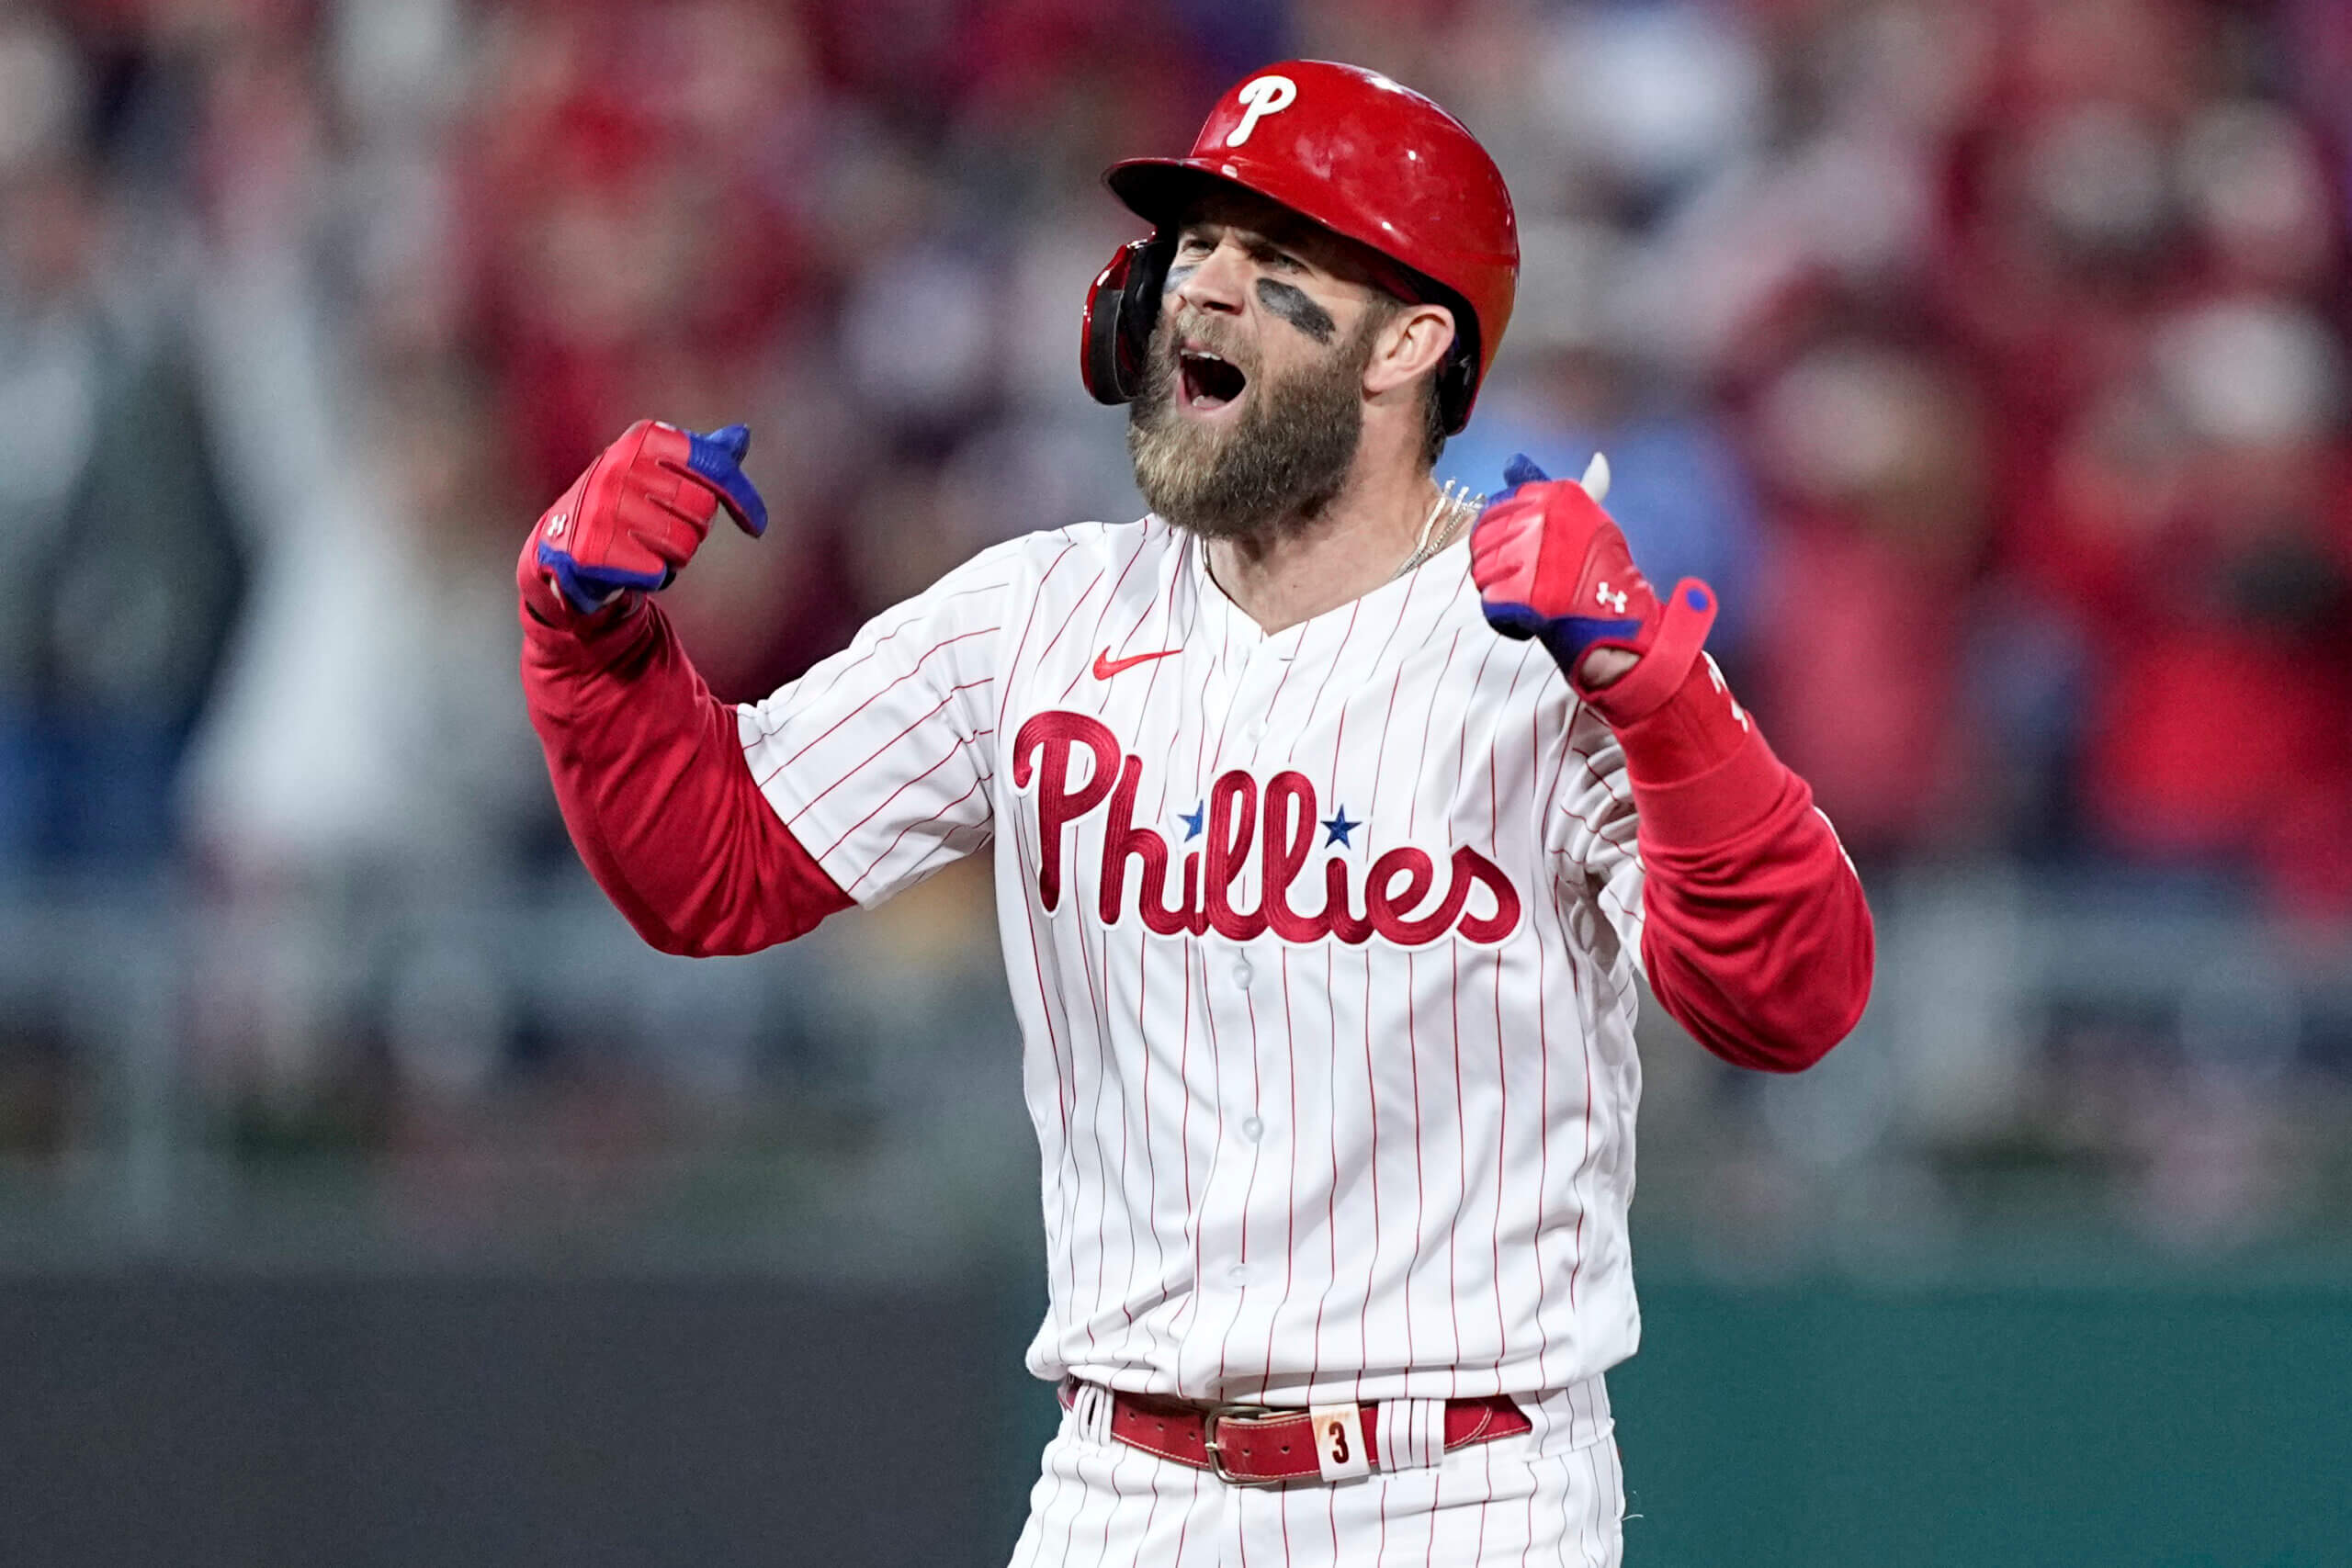 Phillies lose World Series to Astros, team of destiny is denied - Sports  Illustrated